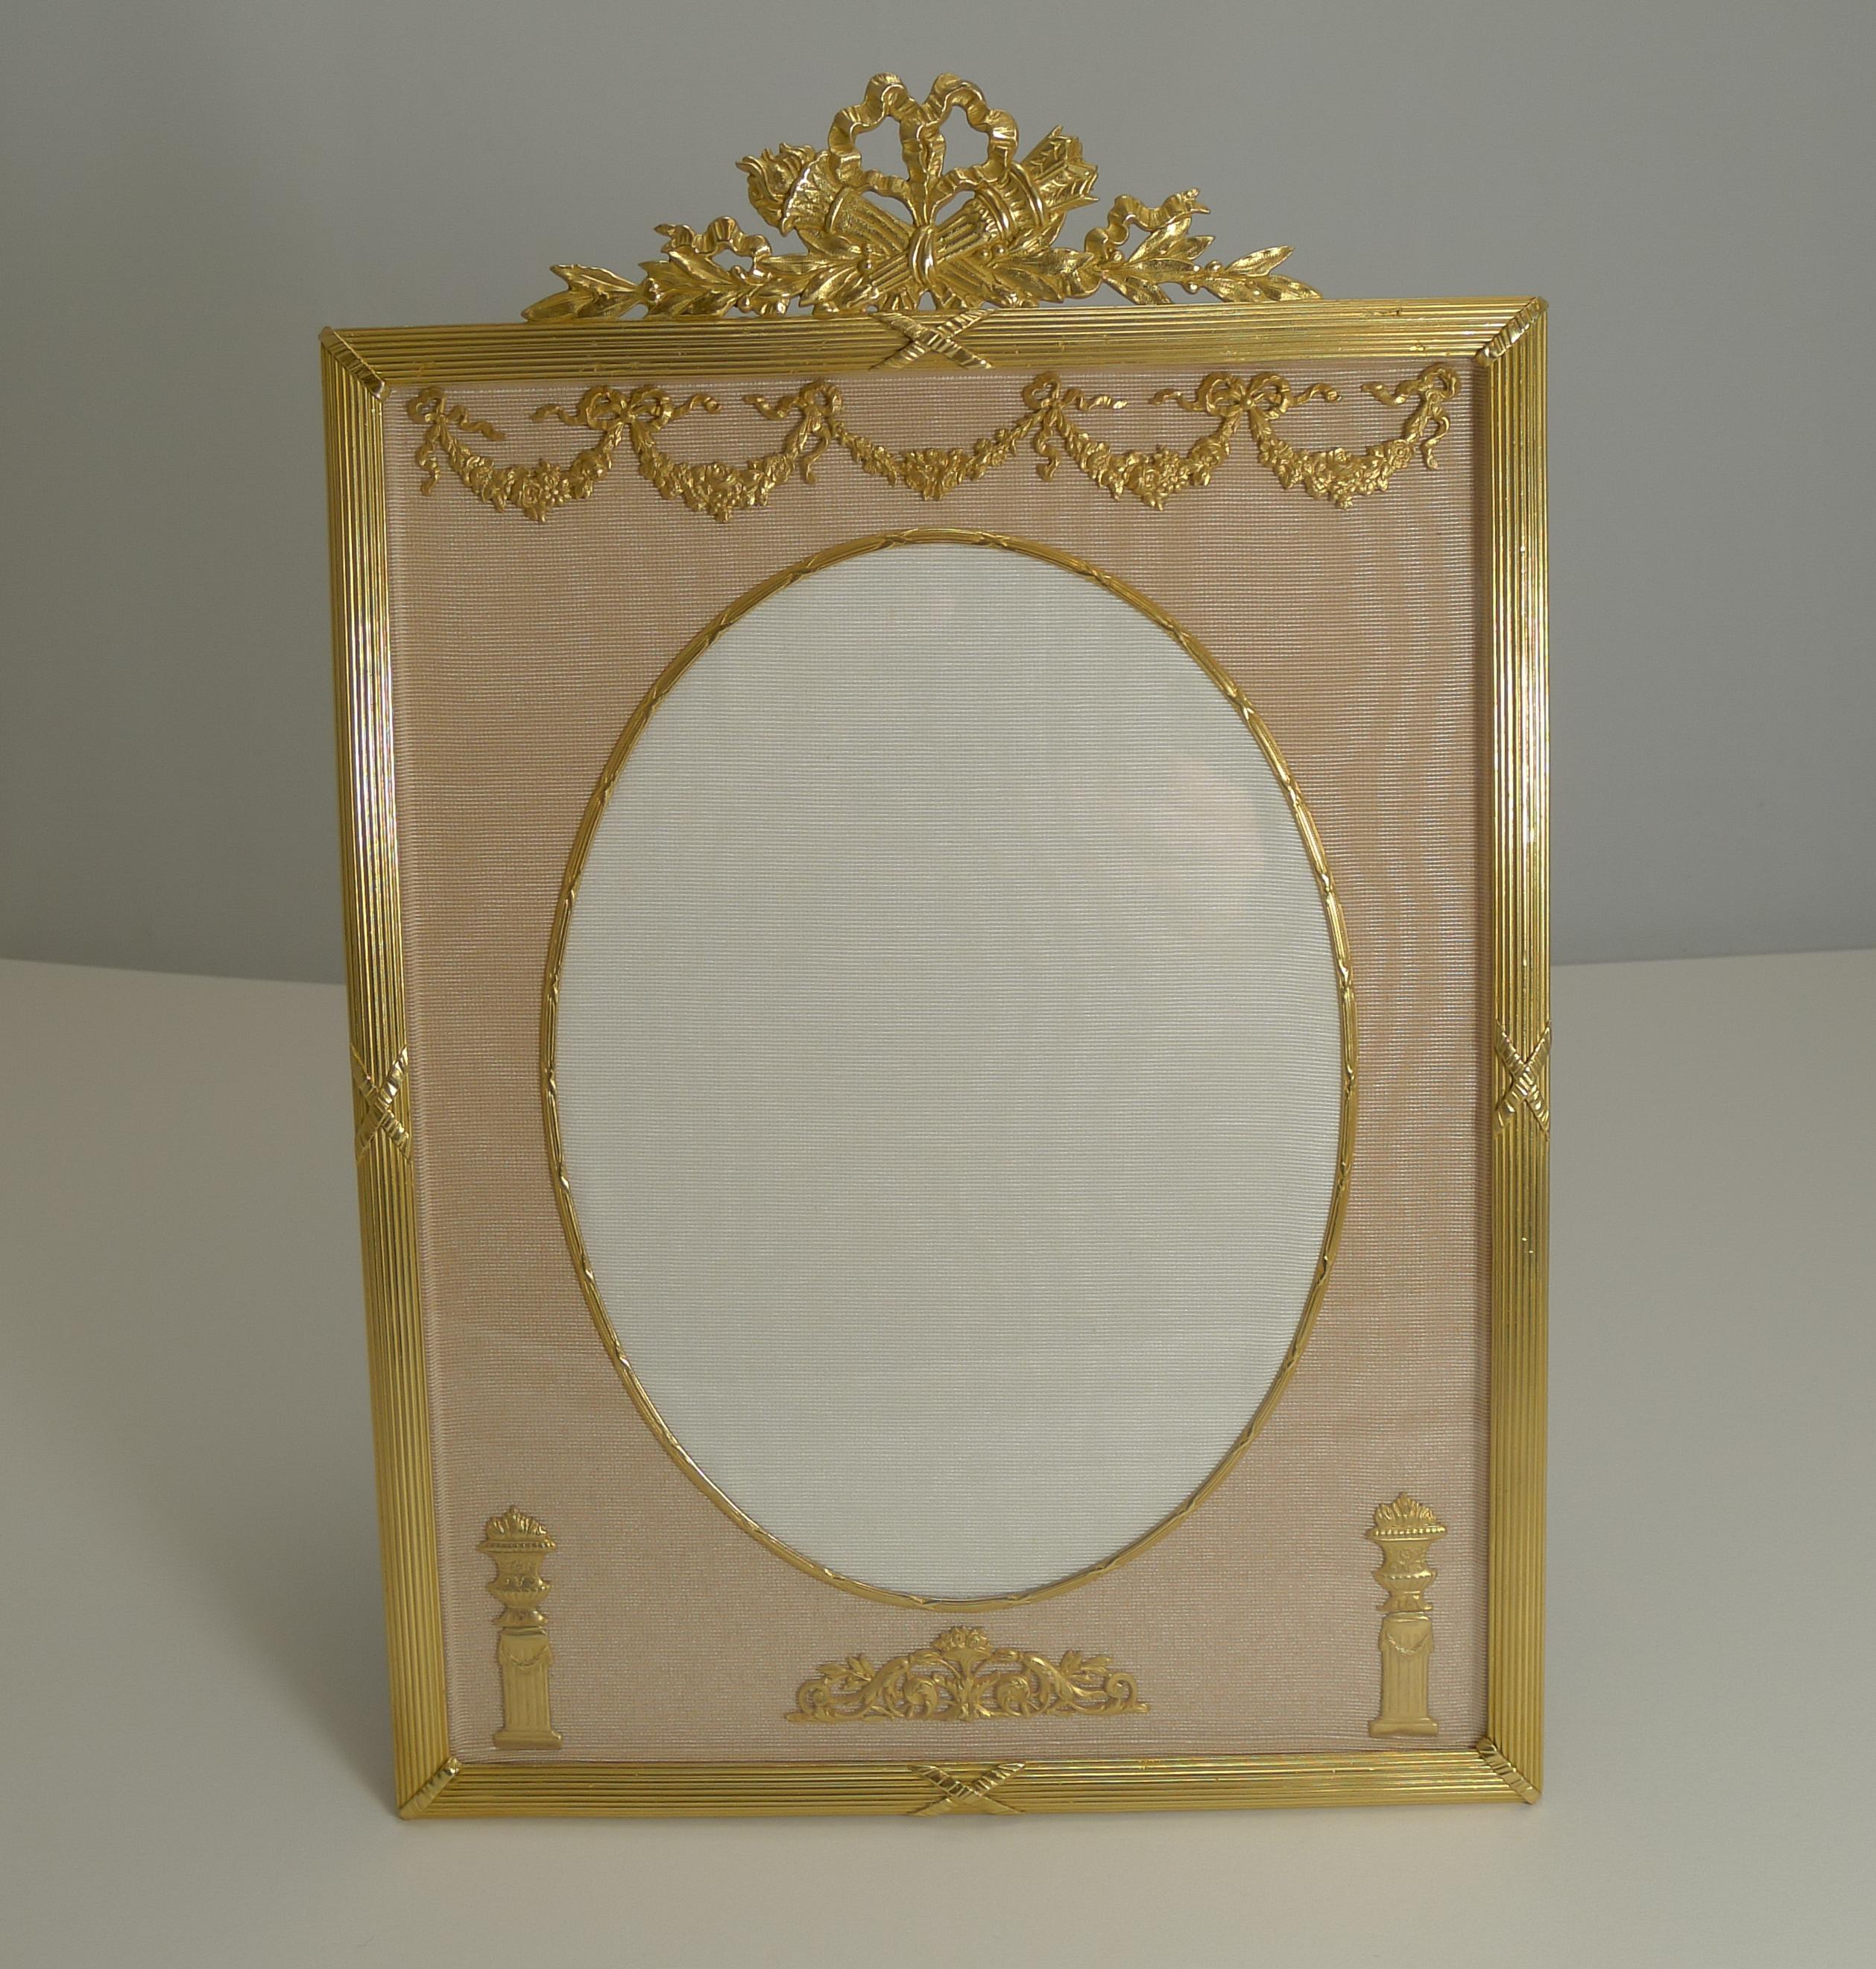 A magnificent and grand photograph frame; if you are looking for a statement piece, this may very well be it.

Made from ormolu or gilded bronze, it has been meticulously restored to it's former glory with a bright patina, clean silk taffeta and a